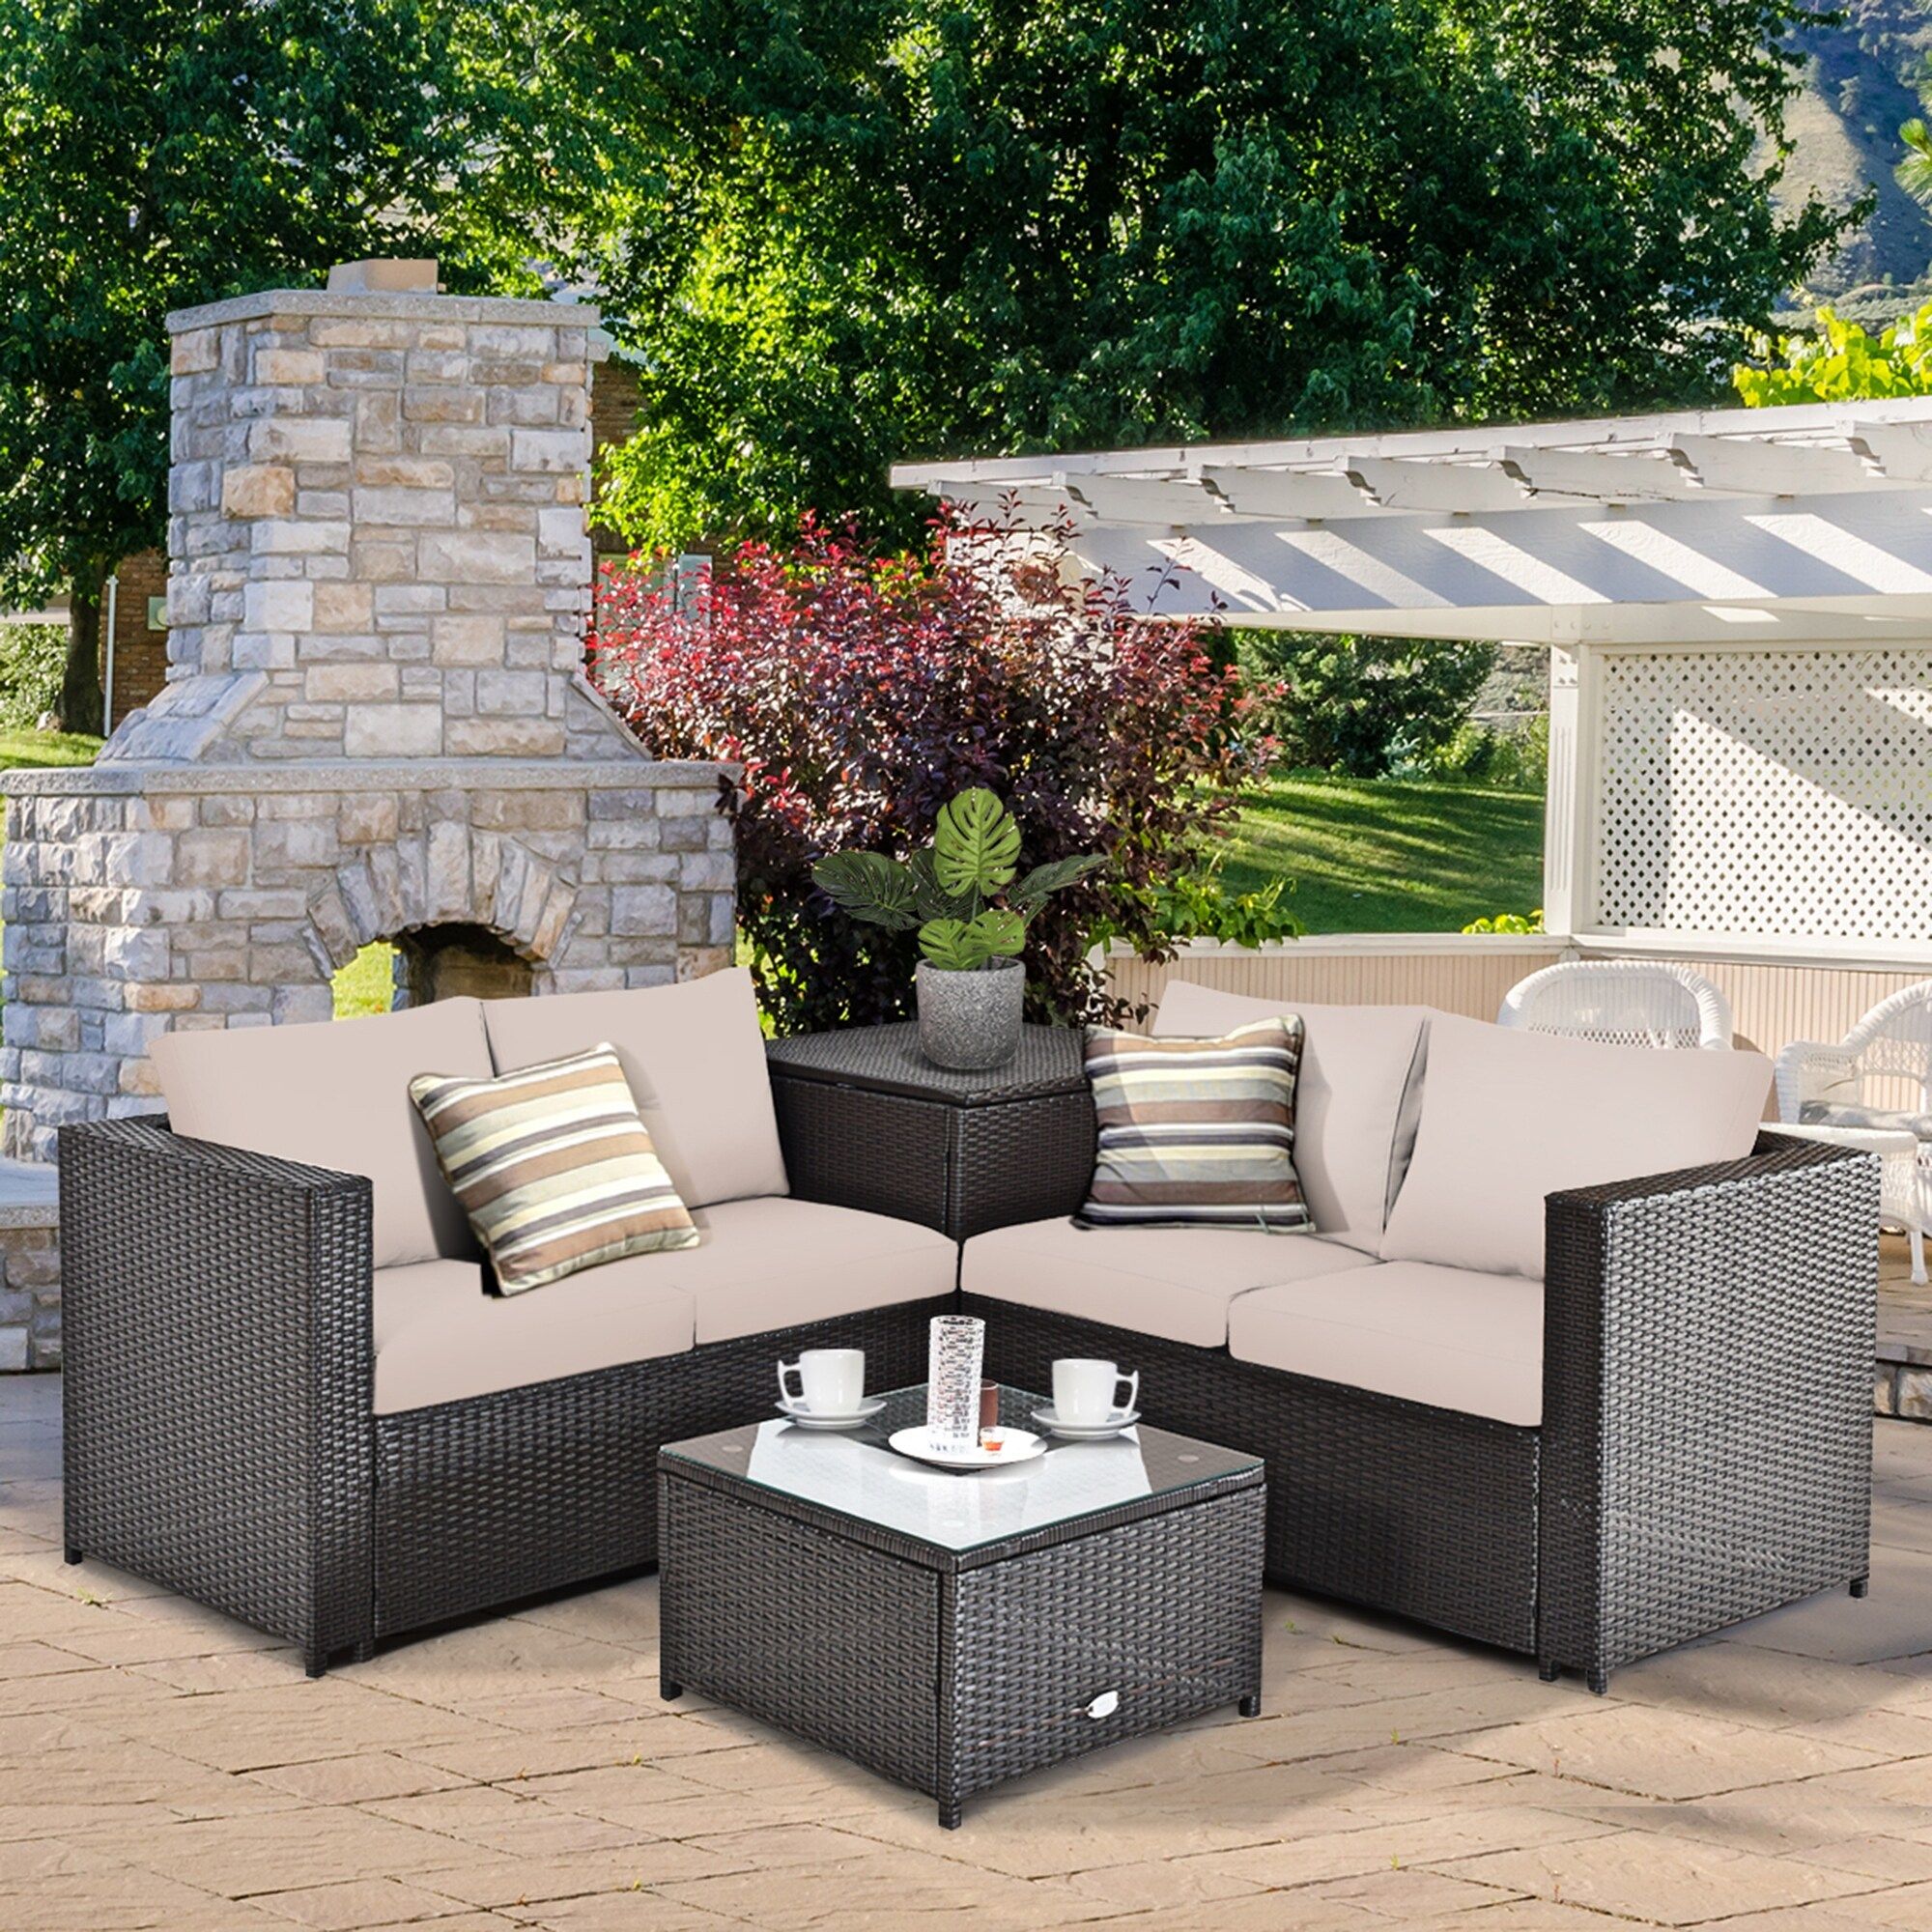 Gymax 4pcs Cushioned Rattan Patio Conversation Set W/ Coffee Table – On  Sale – Bed Bath & Beyond – 35488757 Regarding 4pcs Rattan Patio Coffee Tables (View 2 of 15)